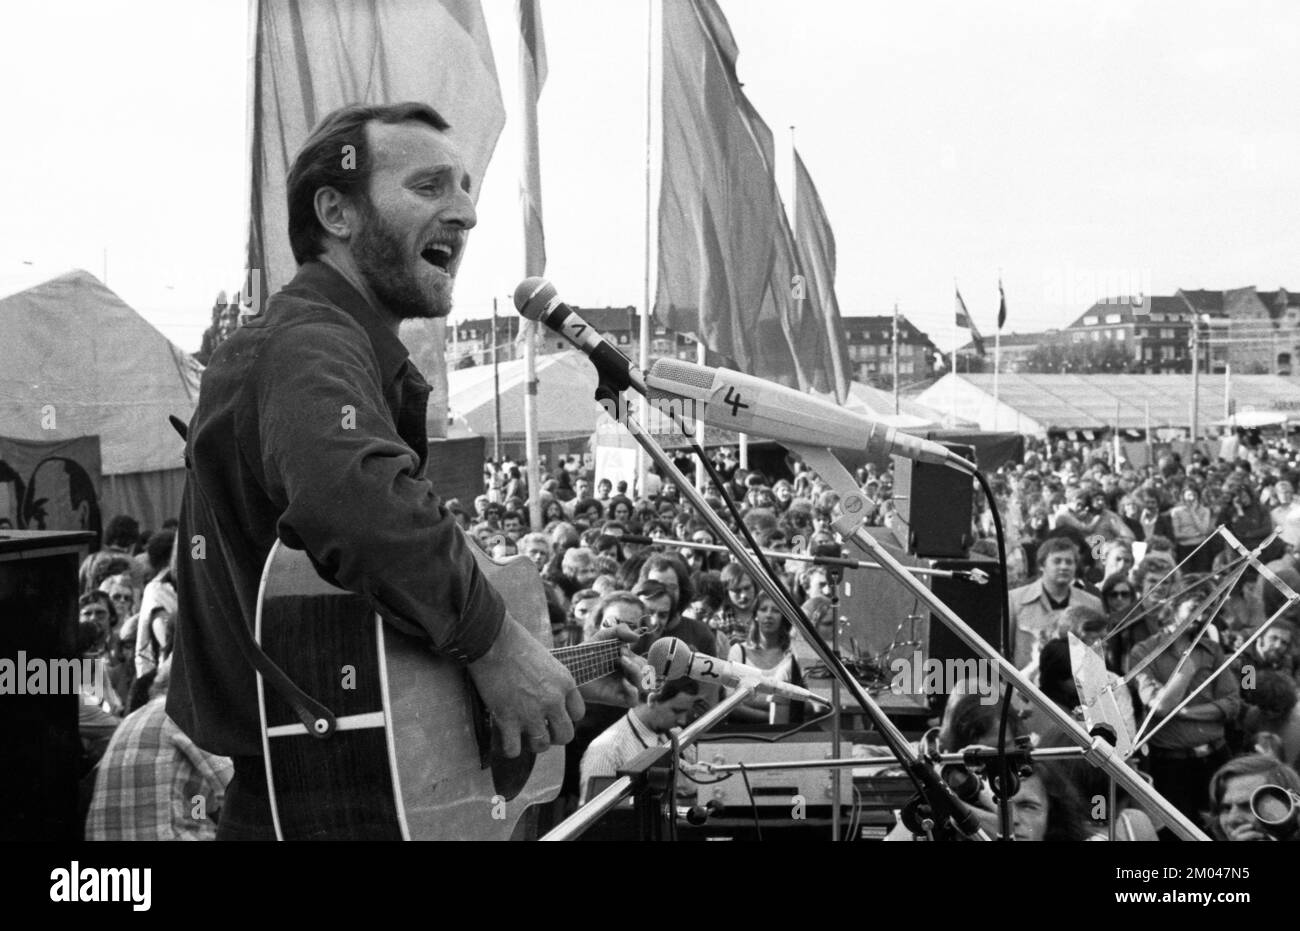 Politics, discussion, folklore, dance, song and play are the ingredients of the UZ festival of the DKP in the Rheinwiesen on 19.9.1975 with star guest Stock Photo